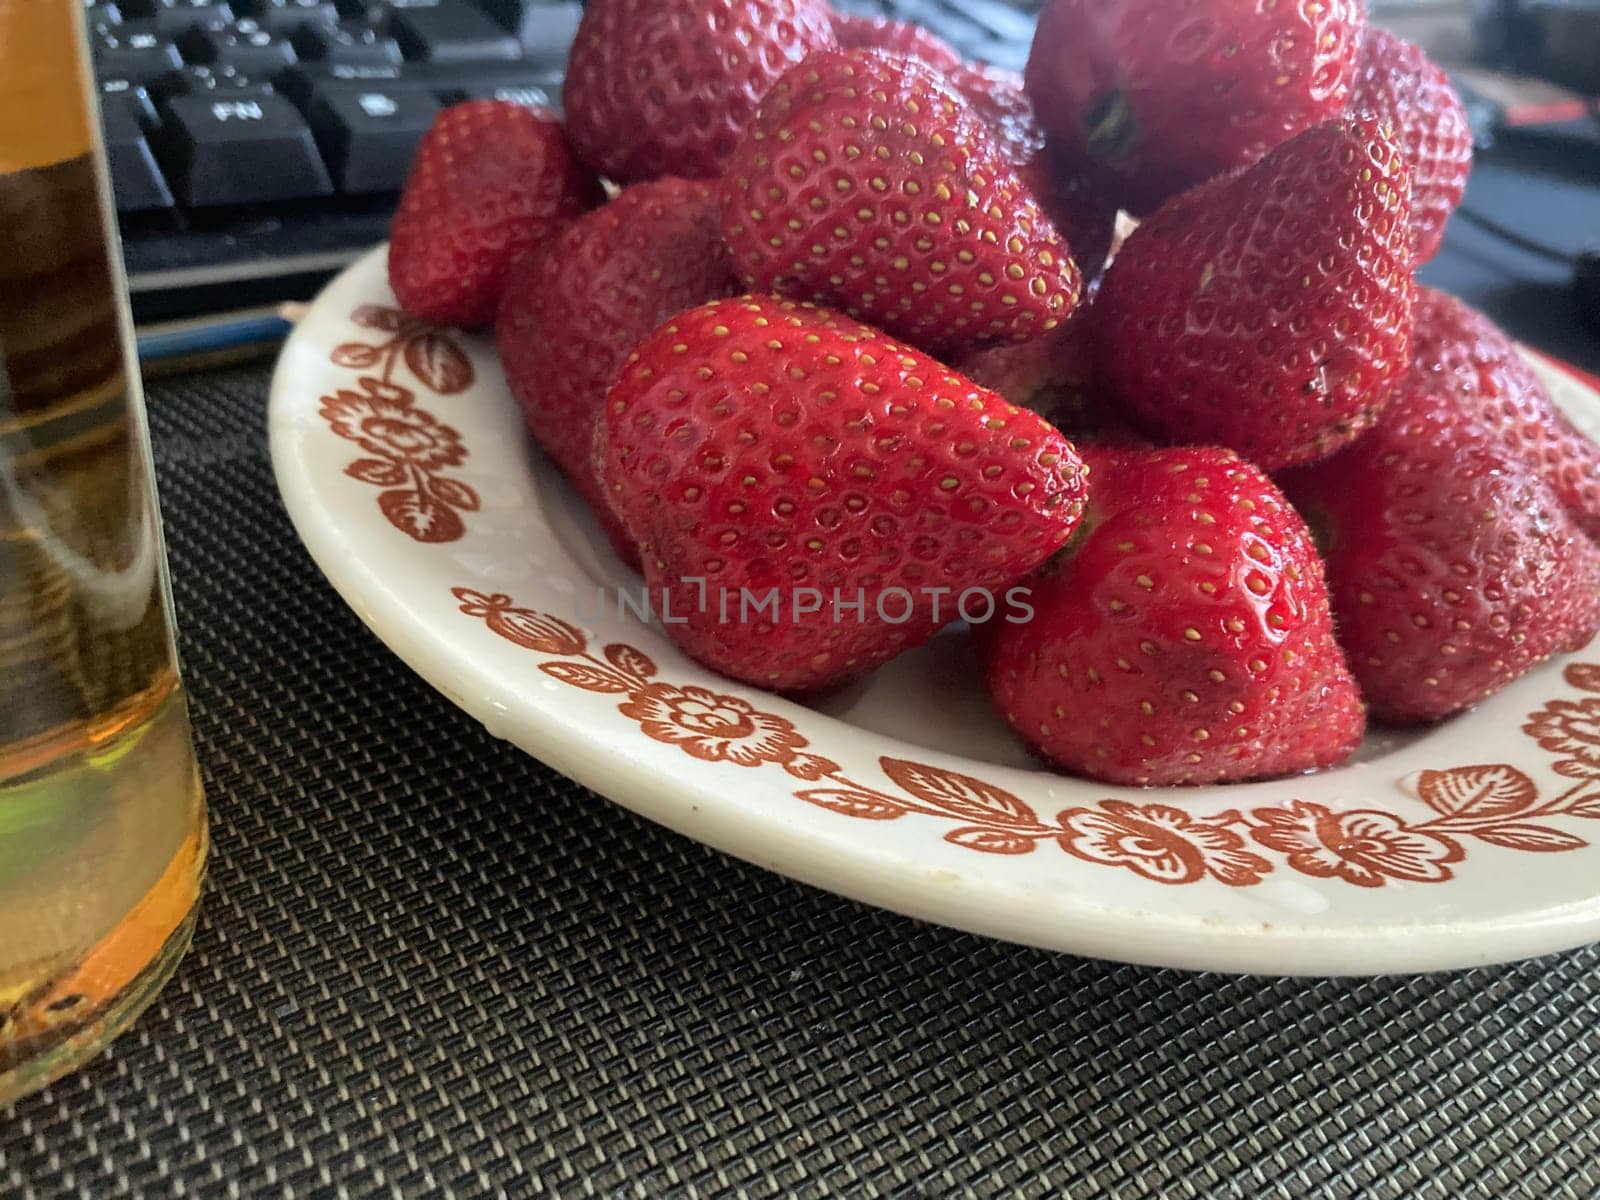 Fresh spring strawberries in a the bowl